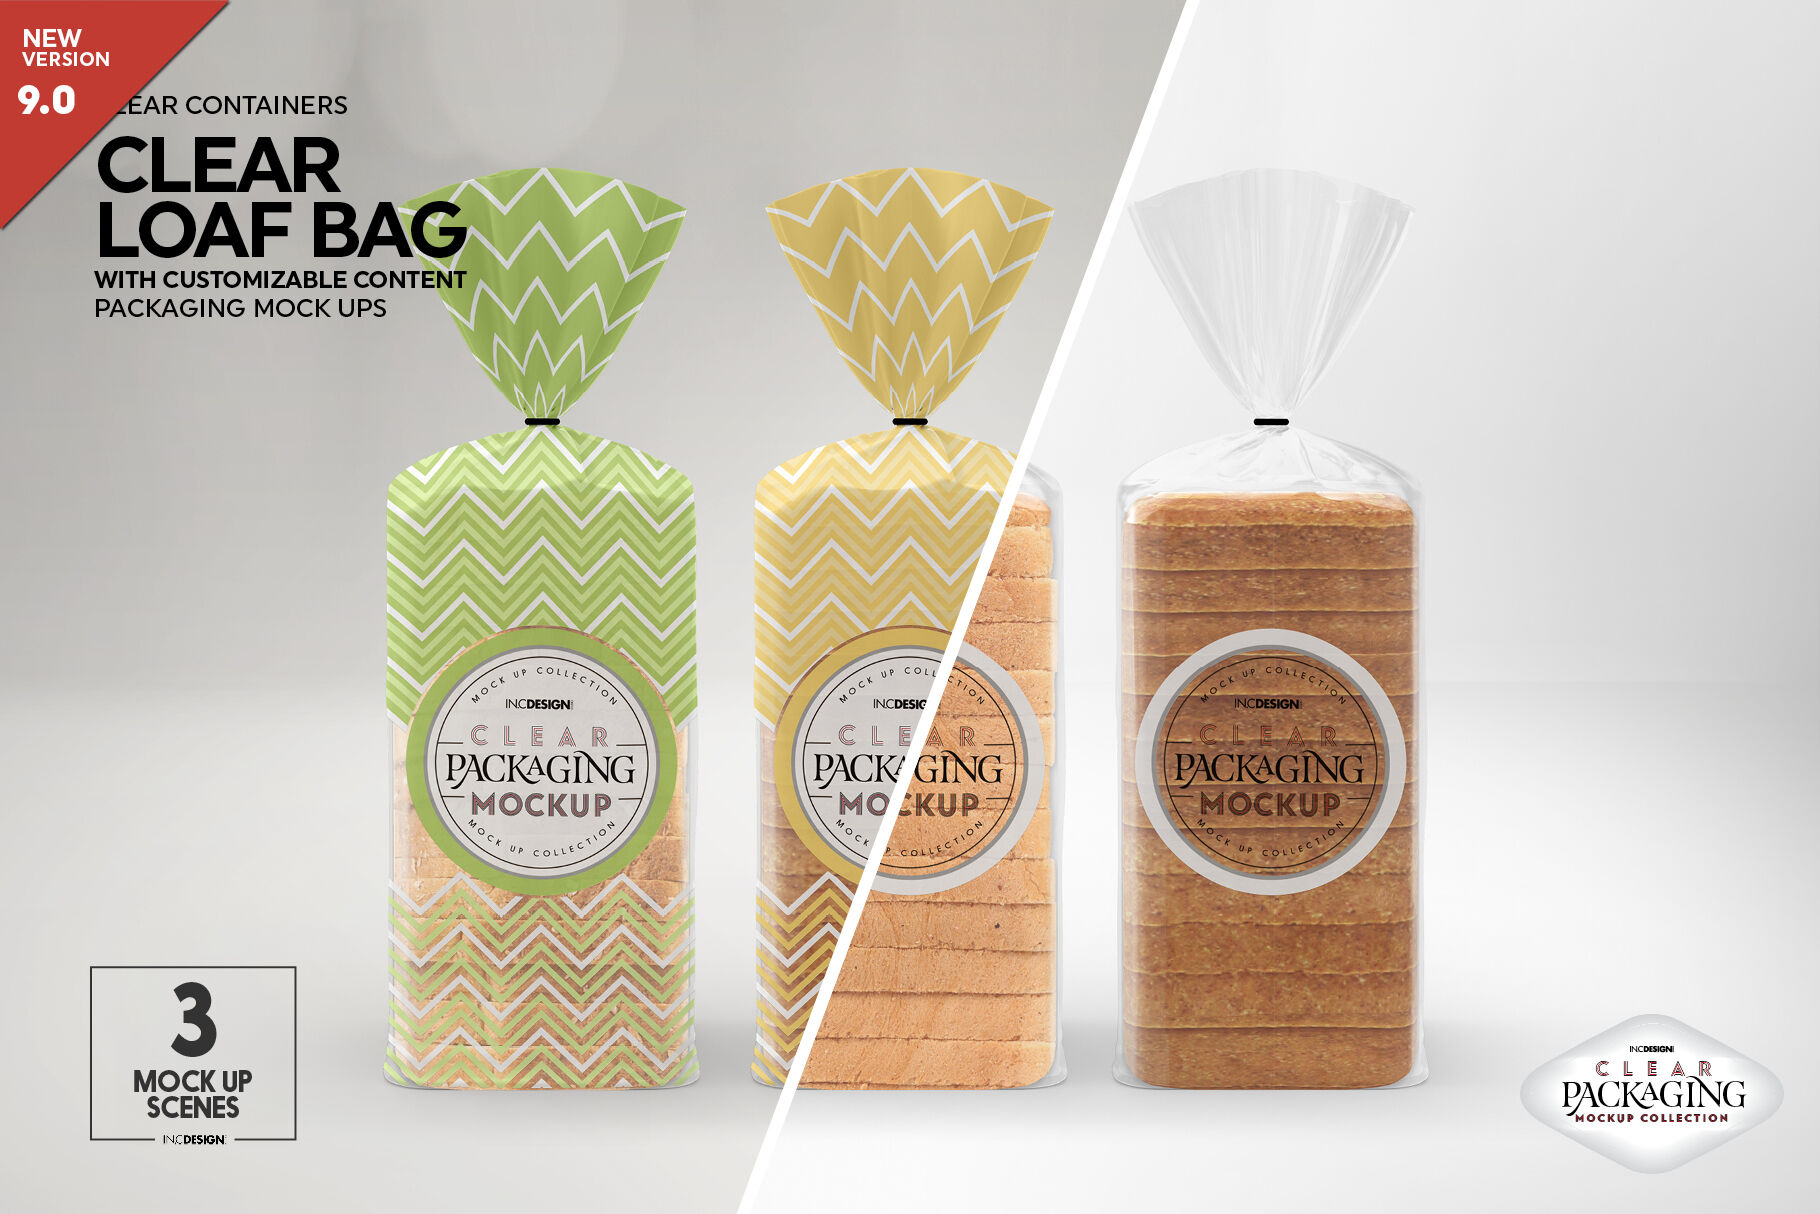 Download Clear Loaf Bread Bag Packaging Mockup By INC Design Studio | TheHungryJPEG.com